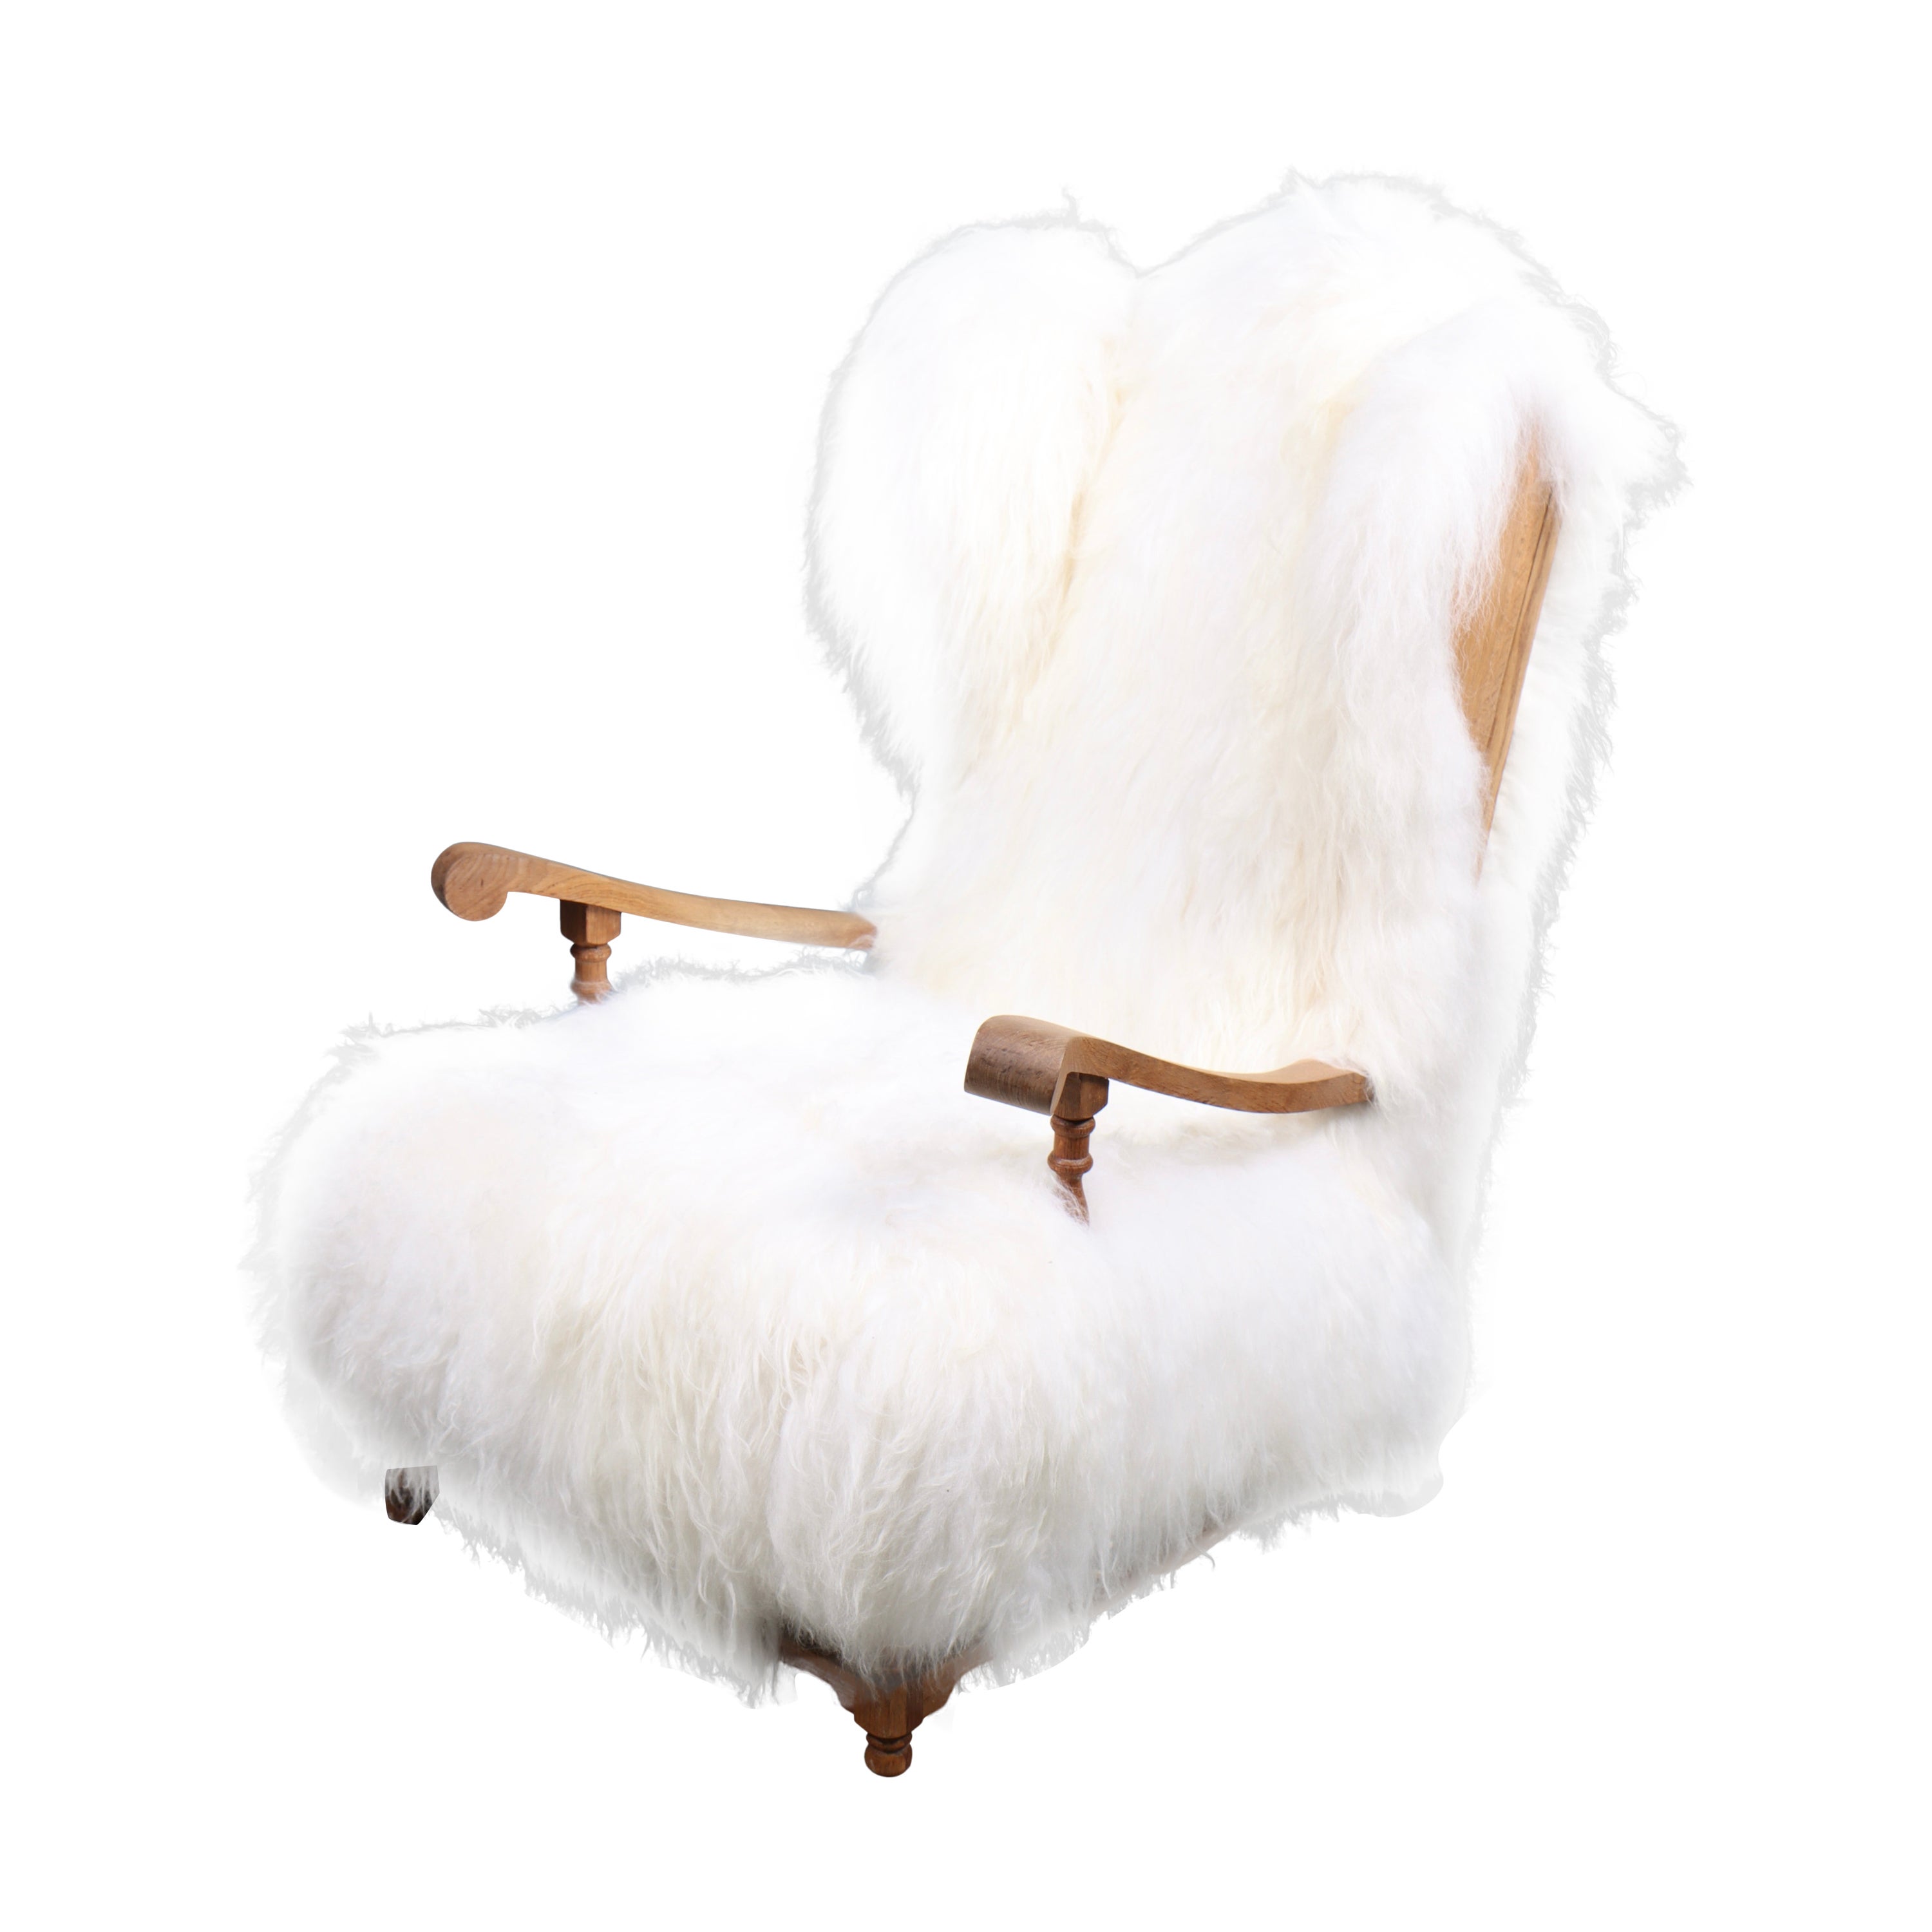 Danish Wingback Chair with Sheepskin, 1940s For Sale